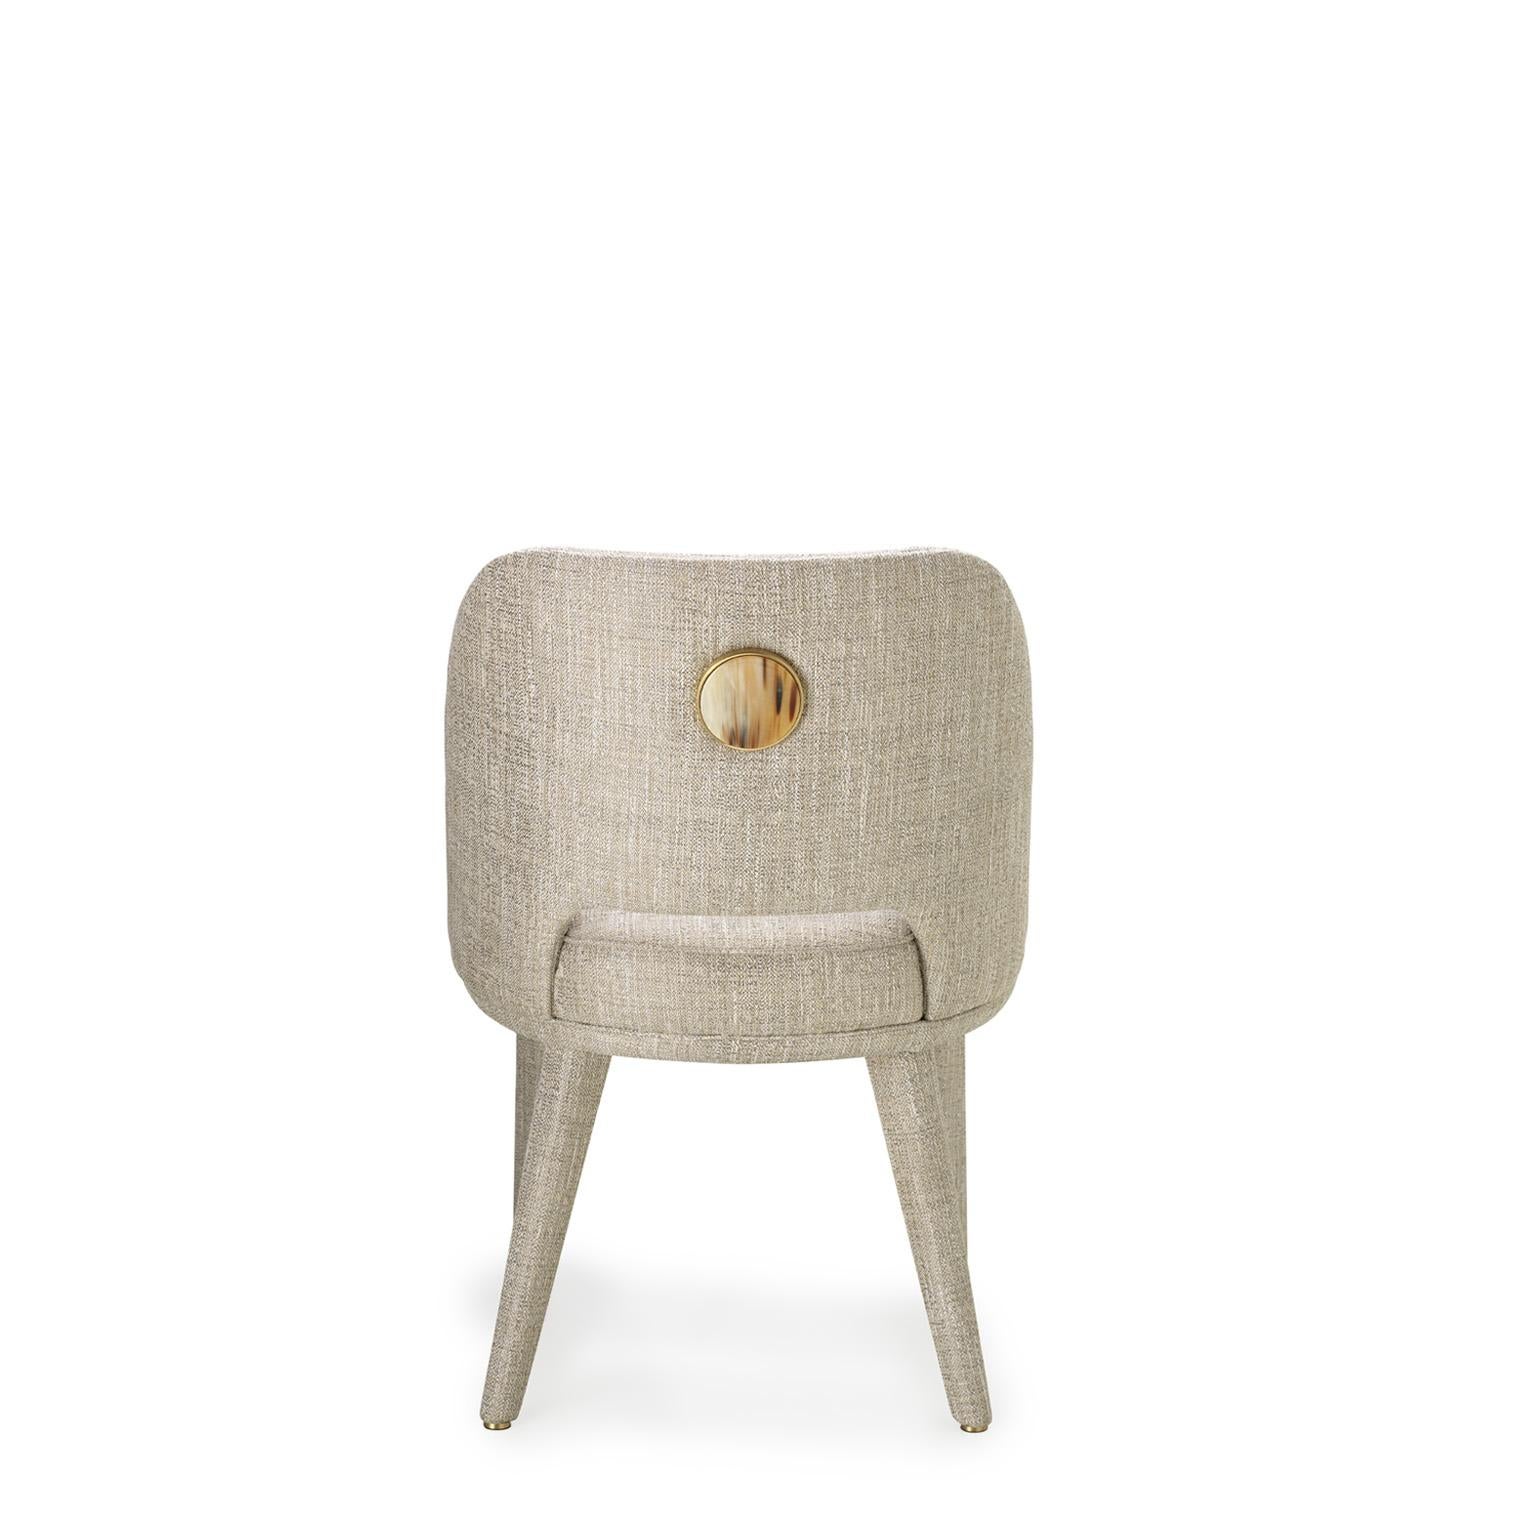 Metal Penelope Chair in Sparks Fabric with Detail in Corno Italiano, Mod. 4430BG For Sale